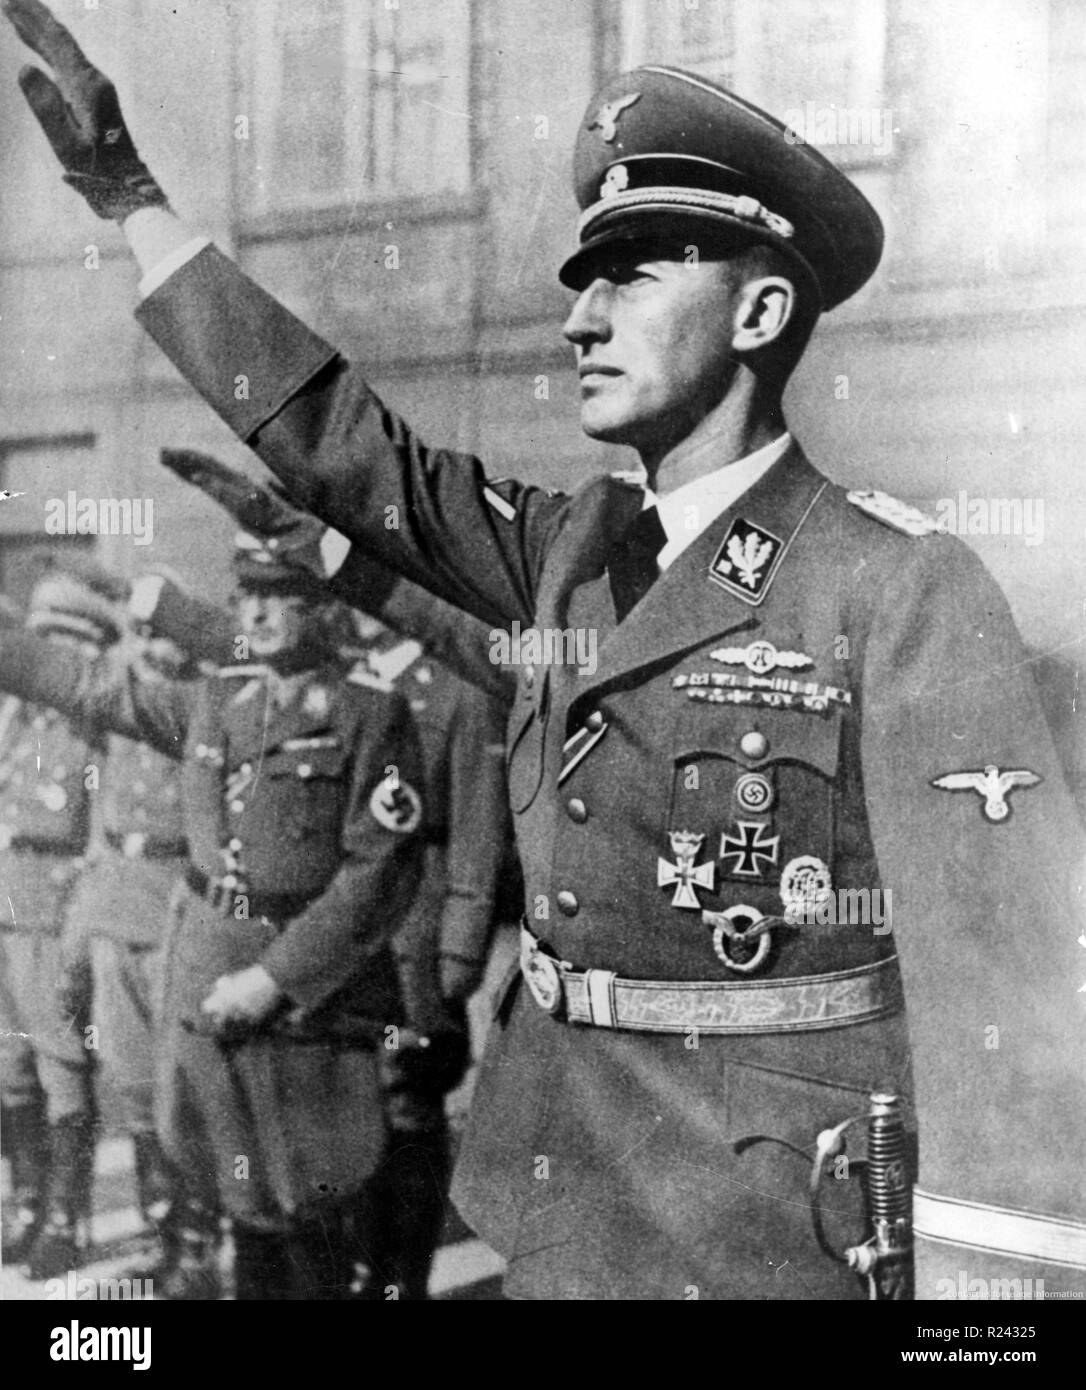 Reinhardt Heydrich (1904 - 4 June 1942) German Nazi official during World War II, and one of the main architects of the Holocaust Stock Photo